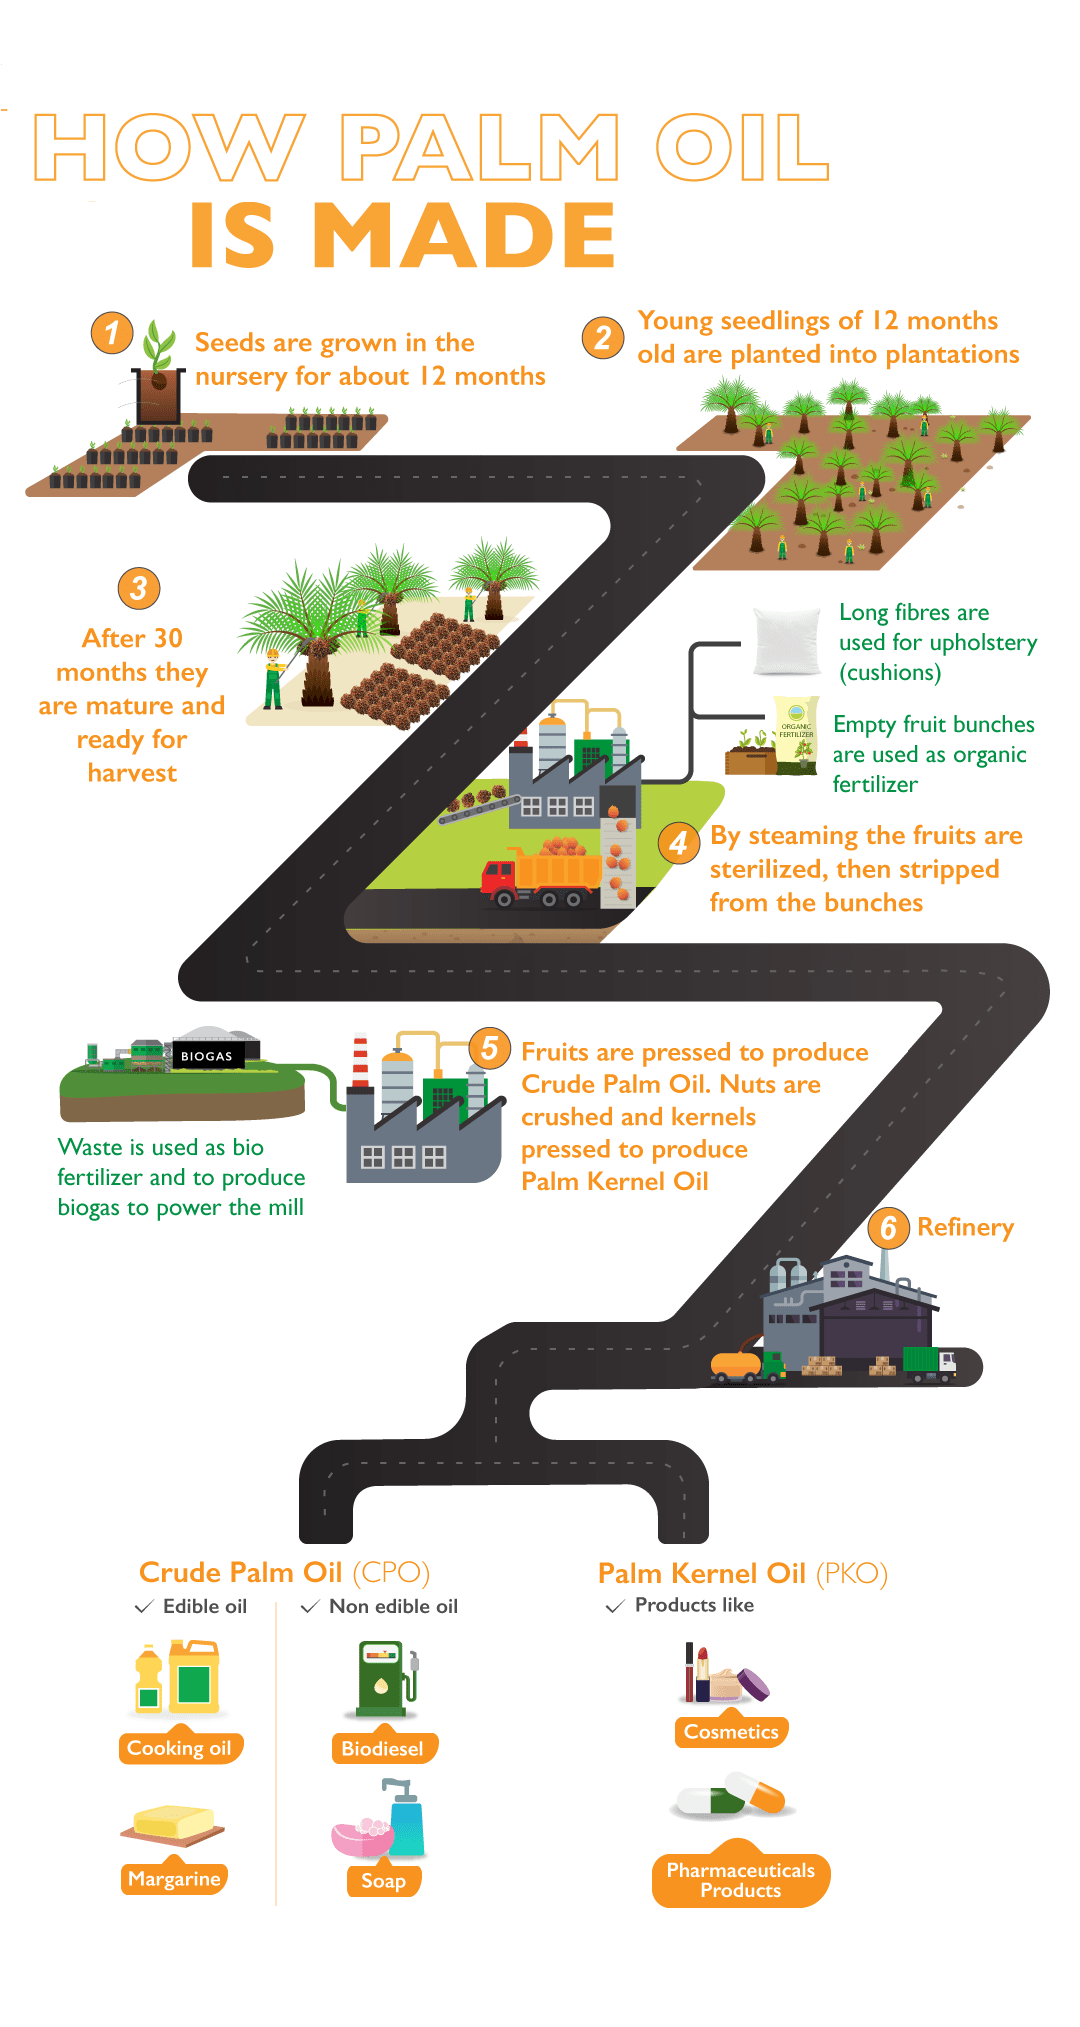 How Palm Oil is made